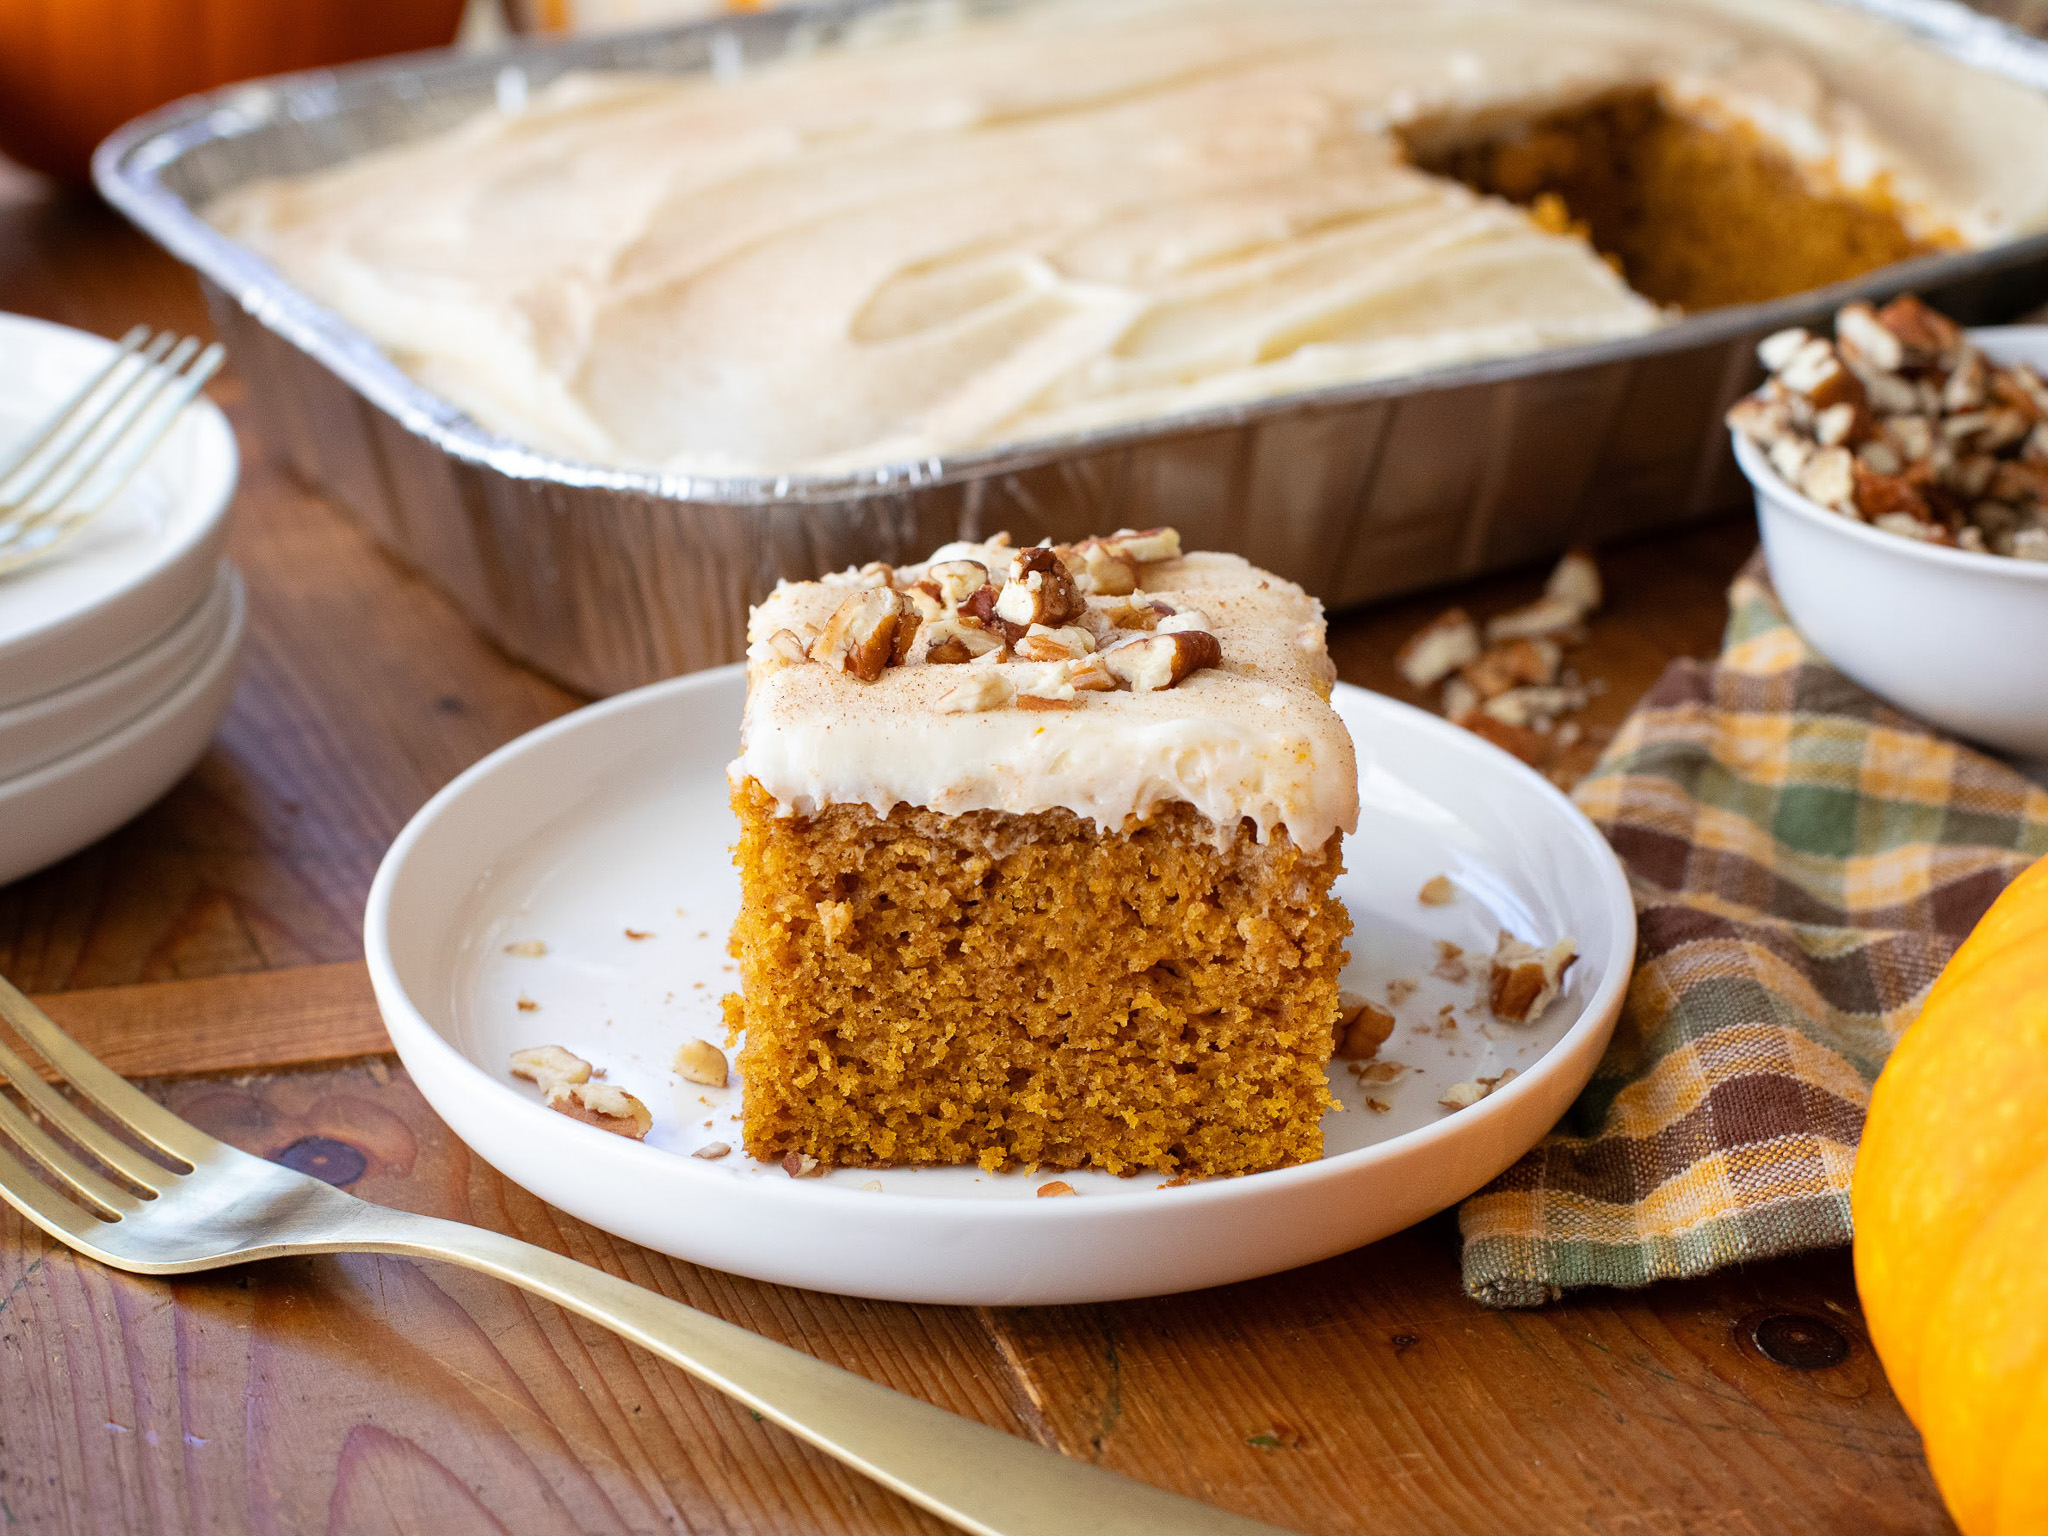 Shake Up Your Holiday Menu With My Pumpkin Cake ( + Grab Savings On EZ Foil® Pans At Publix)